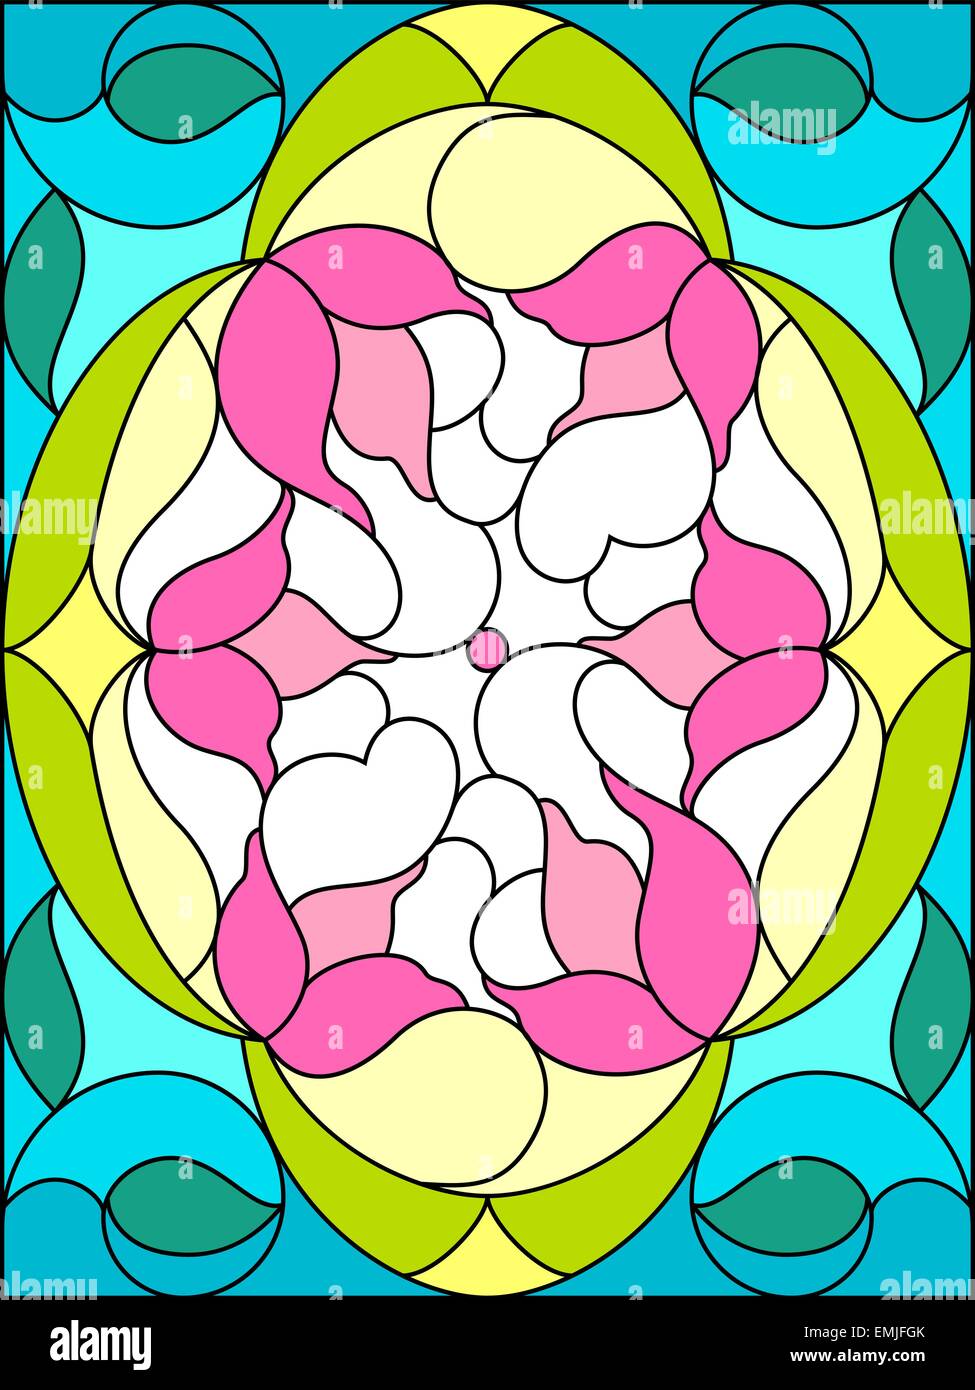 Flowers composition. Floral pattern for stained glass window. Stock Vector